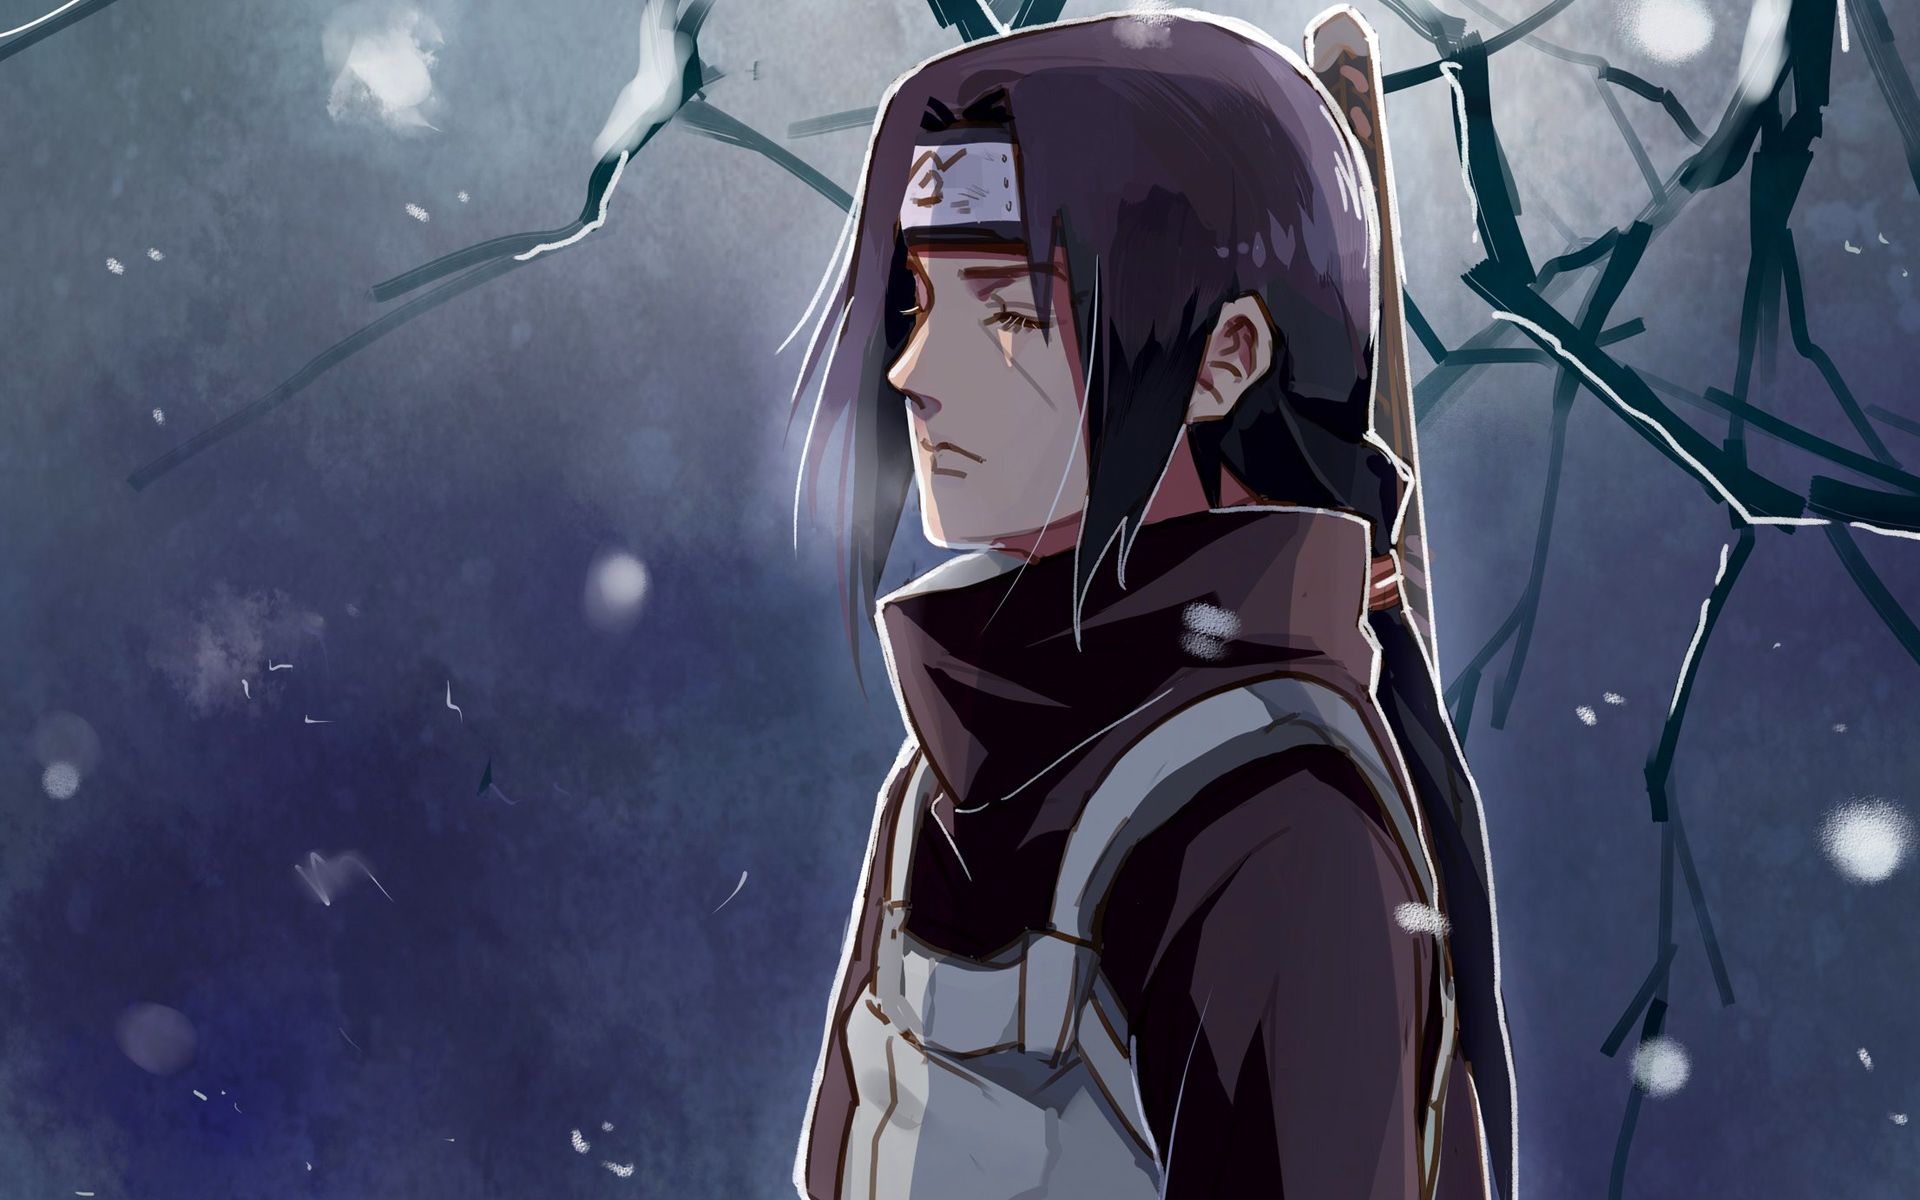 Download wallpaper Itachi Uchiha, cry, manga, darkness, Naruto for desktop with resolution 1920x1200. High Quality HD picture wallpaper